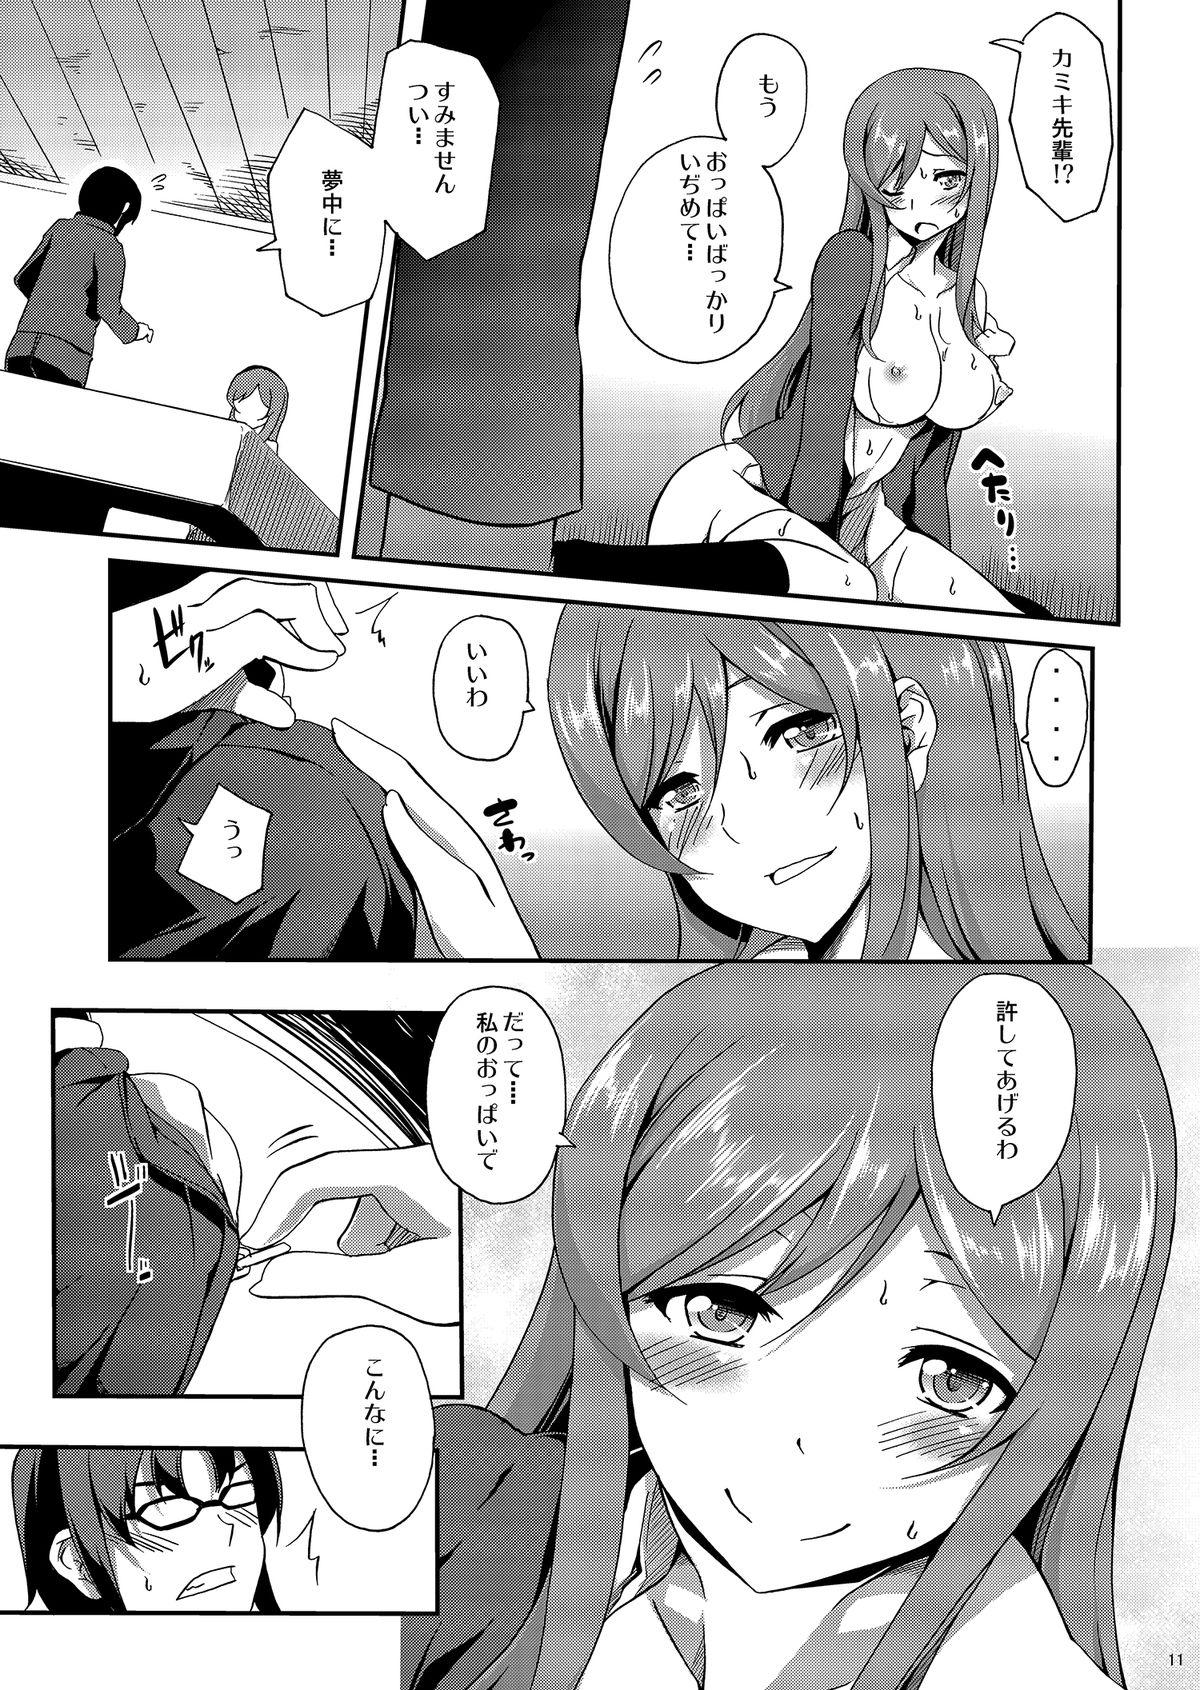 Girl Gets Fucked Mirai no Onegai - Gundam build fighters try Double Blowjob - Page 10